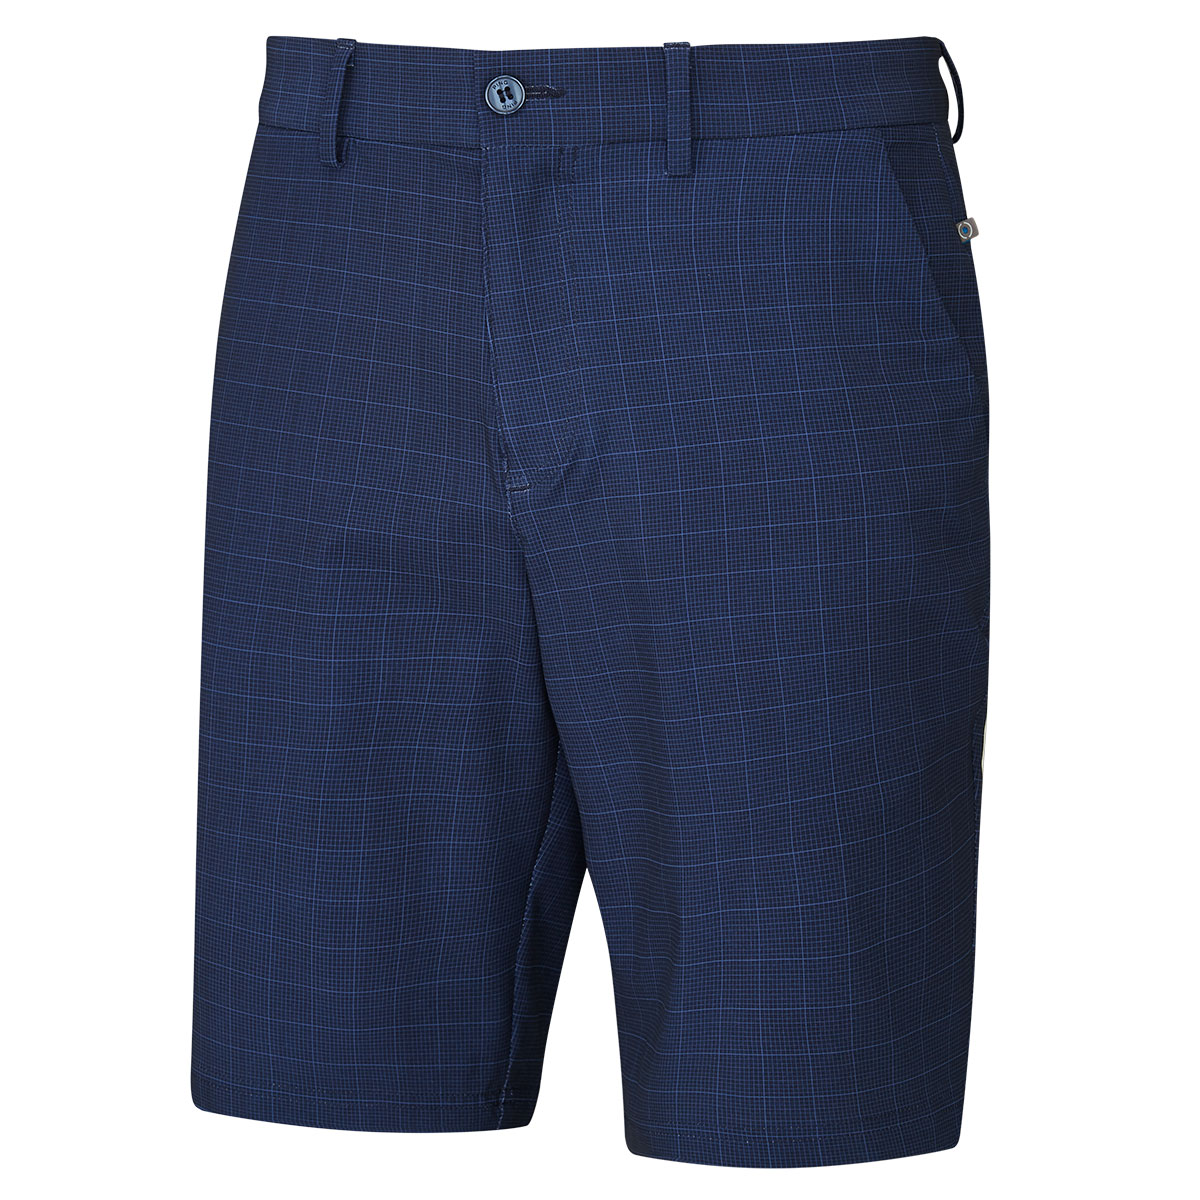 PING Men's Pendle Stretch Golf Shorts from american golf